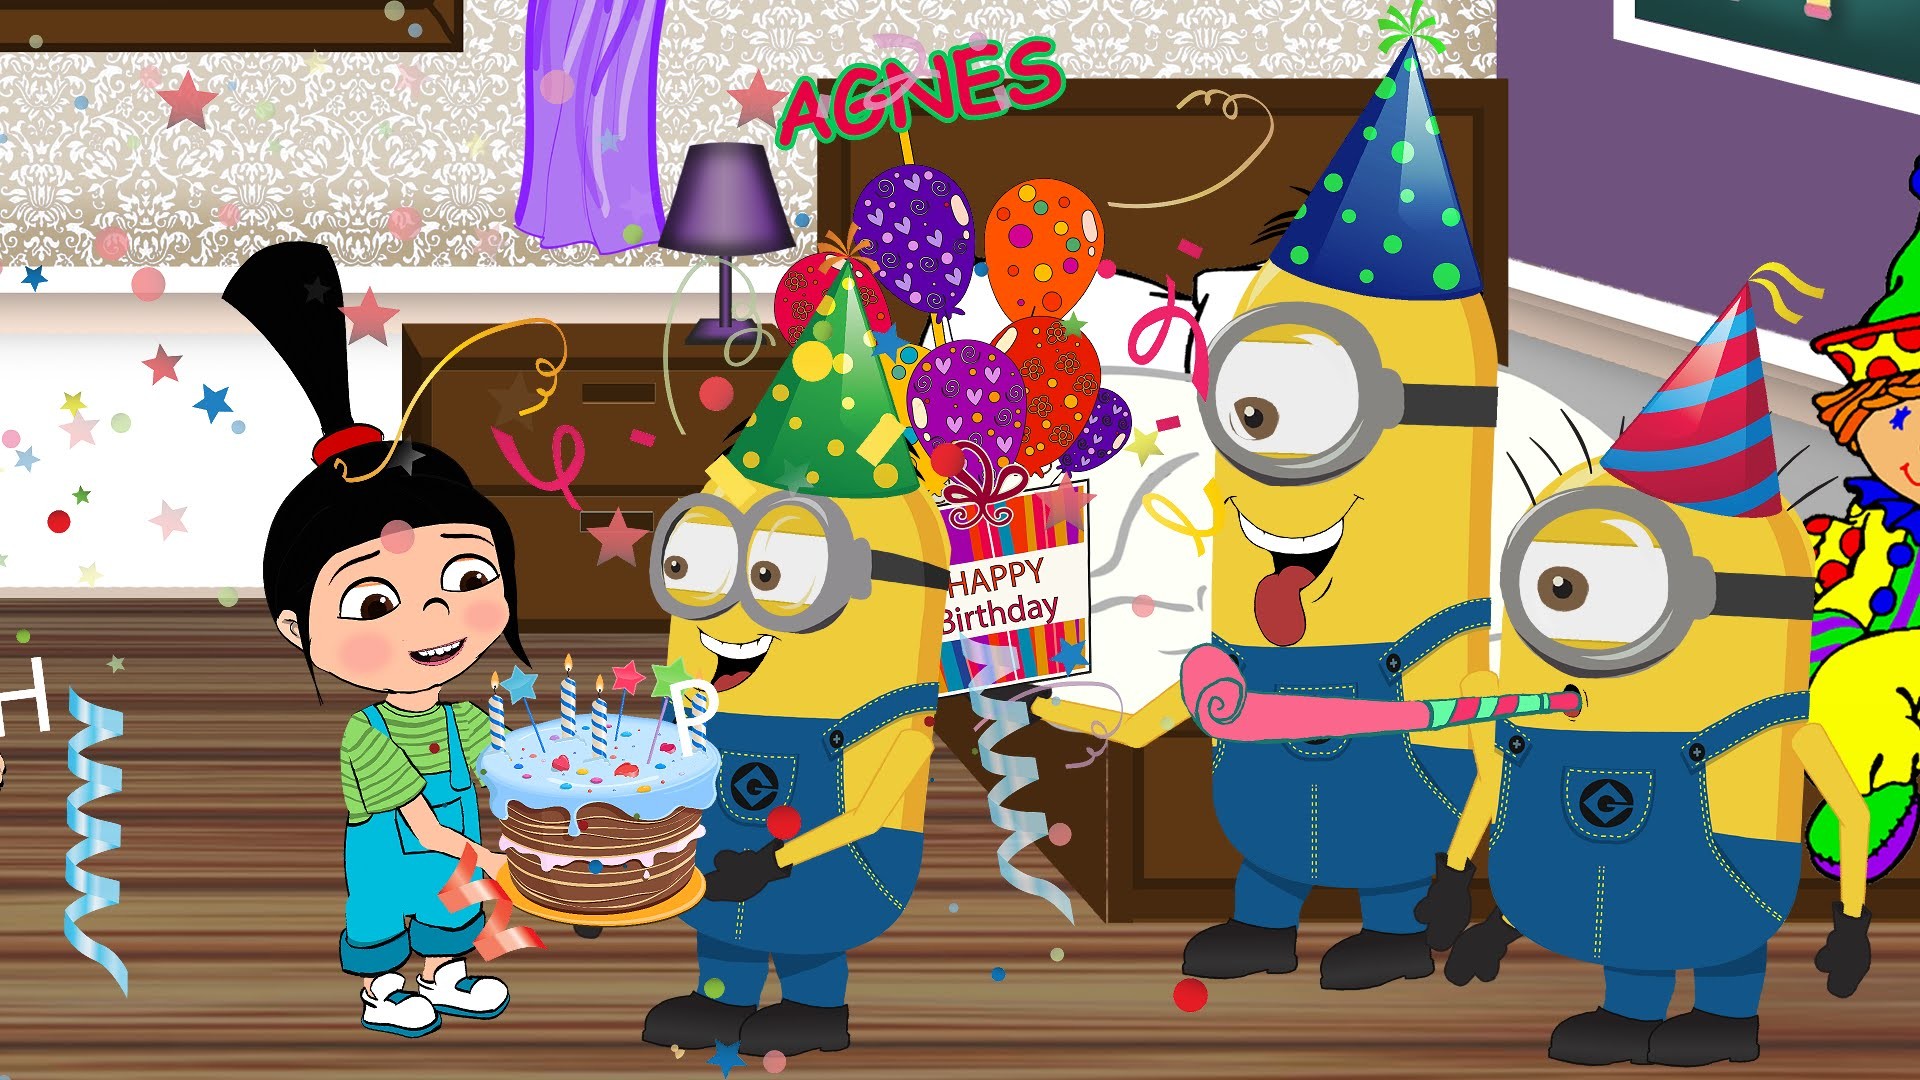 1920x1080 Minions Happy Birthday Song ~ Agnes Despicable me - Birthday Party [HD]  1080P - YouTube